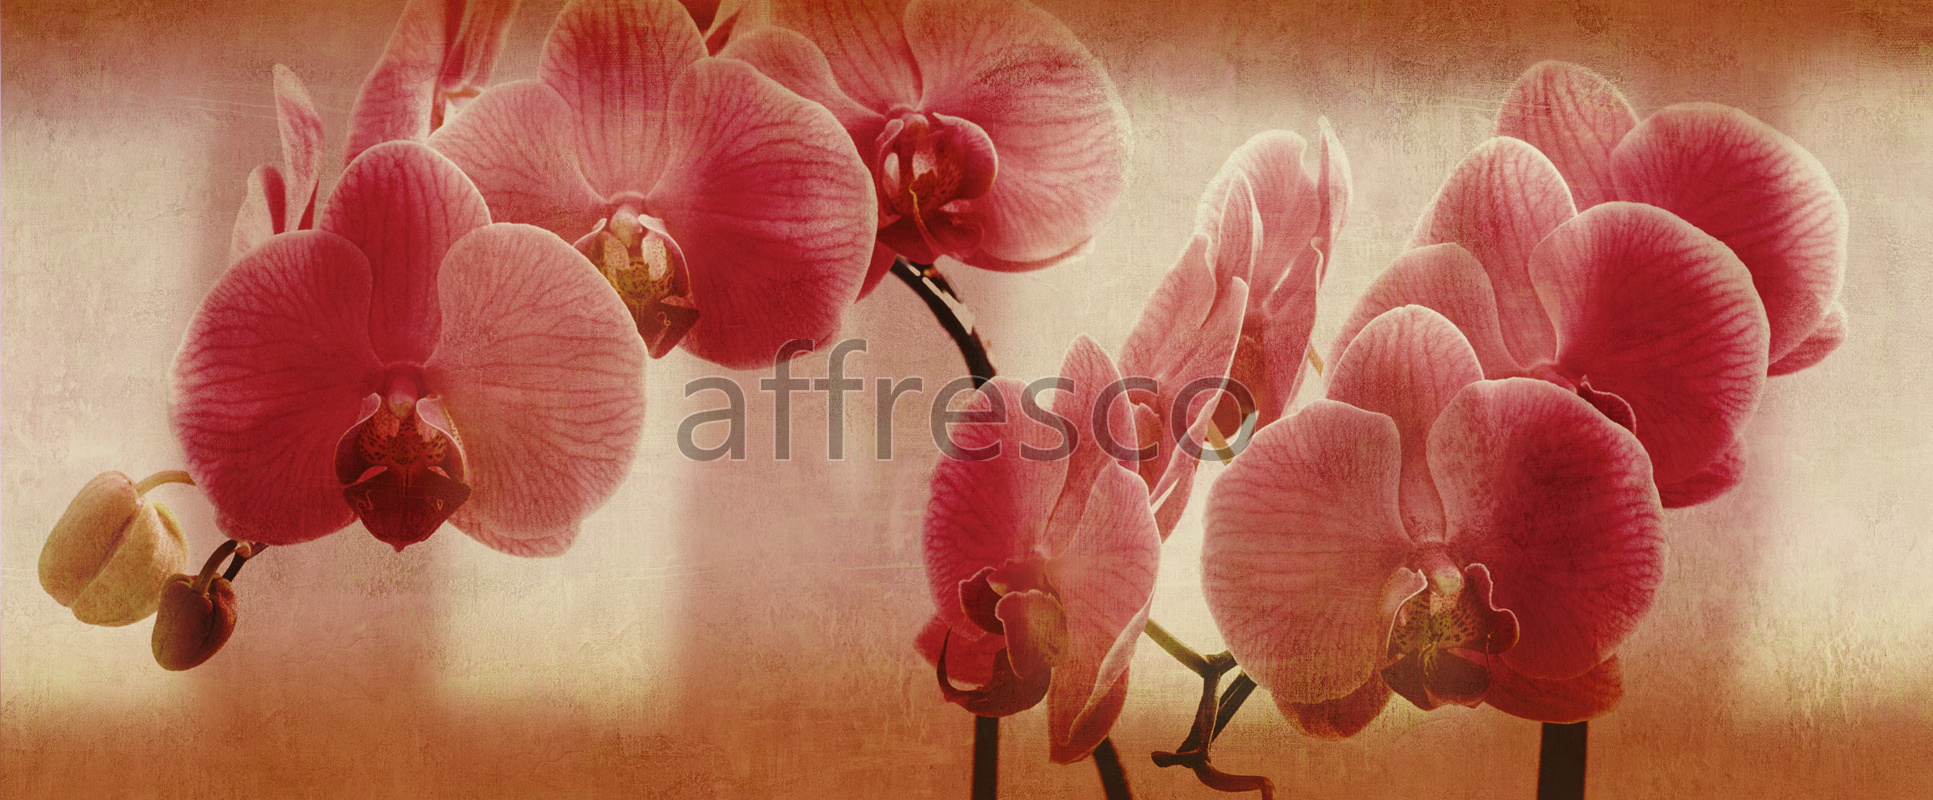 ID135671 | Flowers | flowers on orchid branch | Affresco Factory